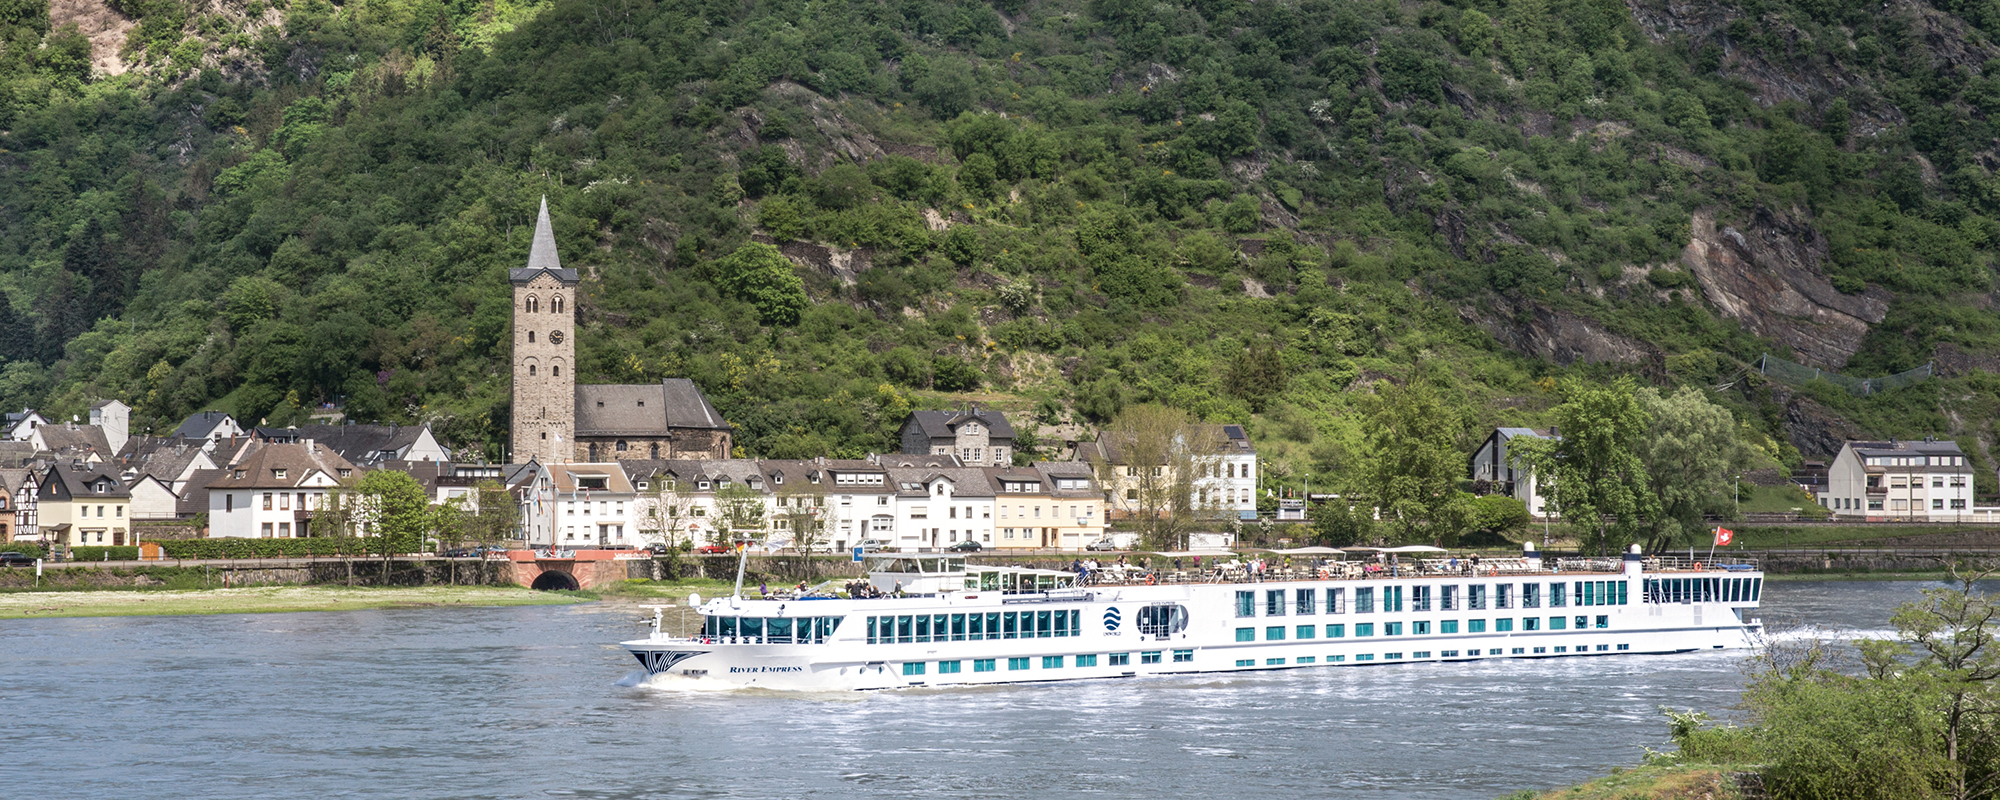 Image of a AmaWaterways River Cruise